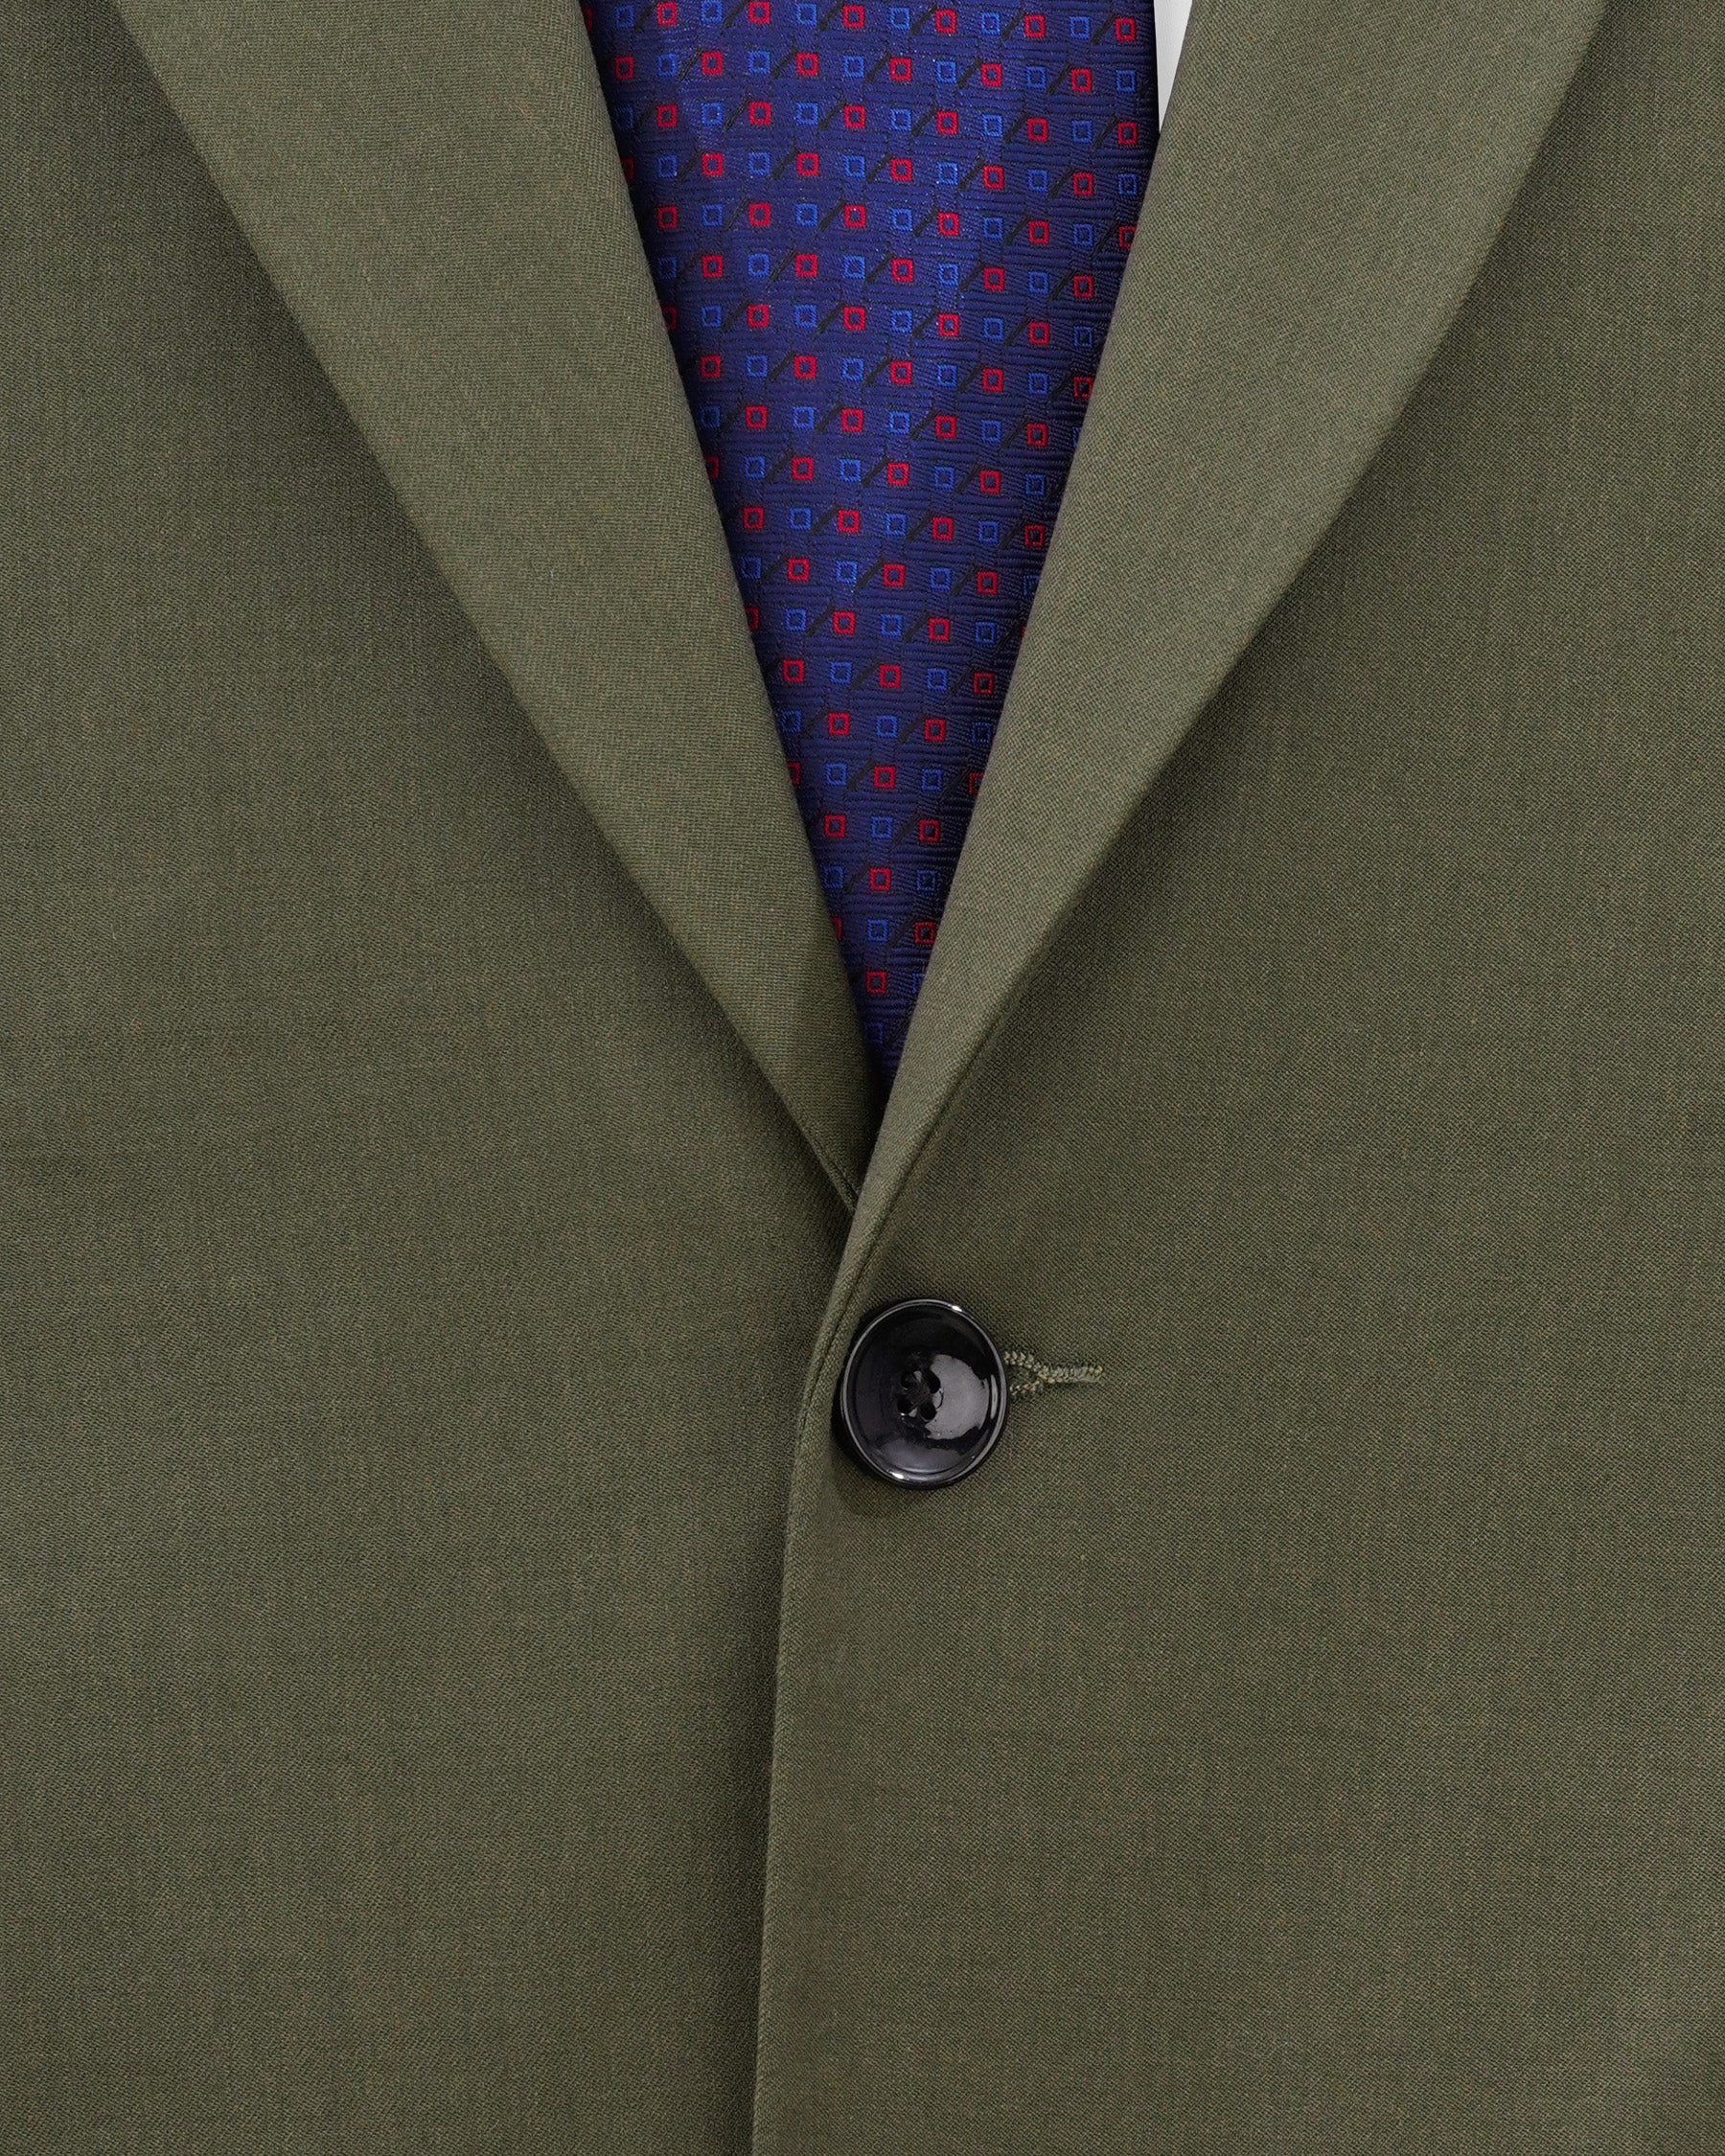 Rifle Green Single Breasted Suit